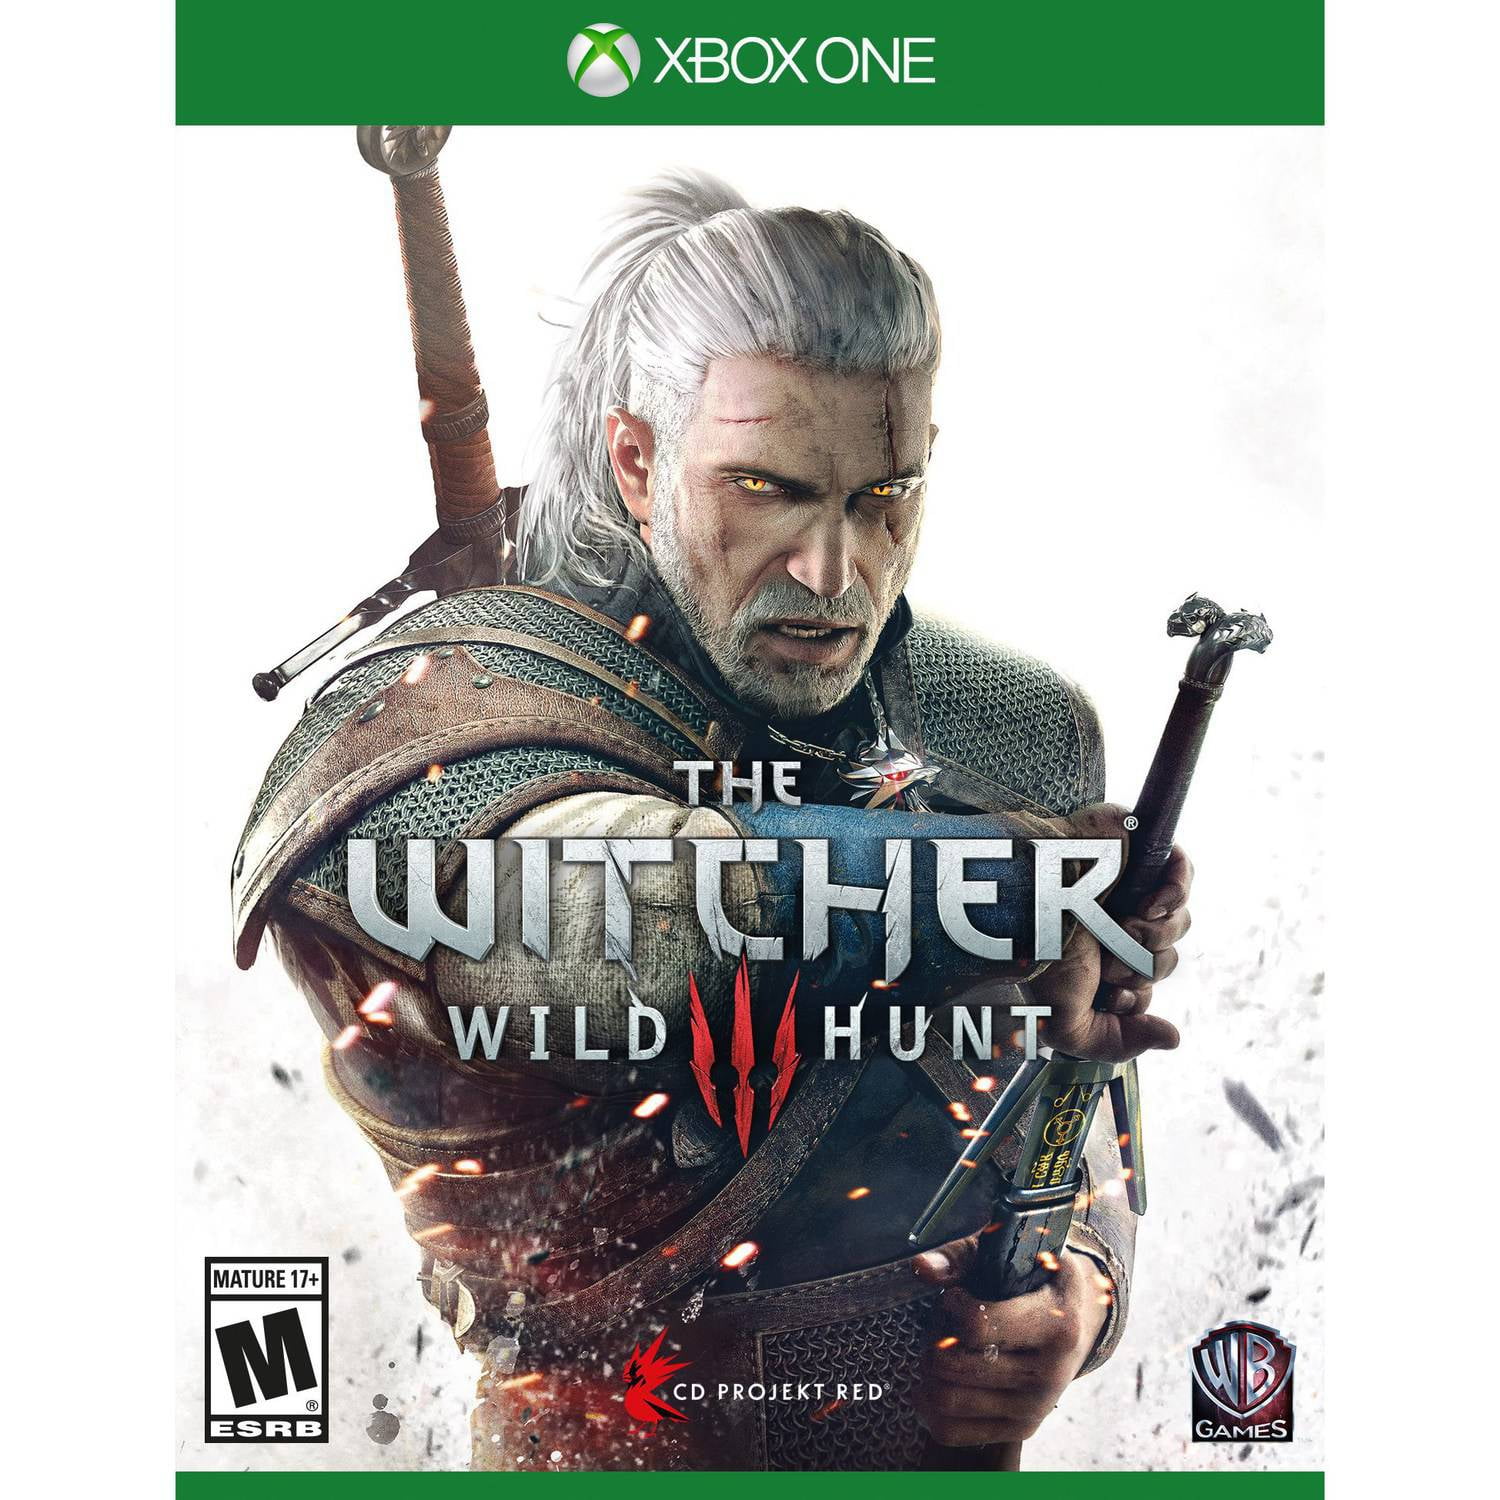 Cash Converters - Xbox 360 Game The Witcher Assasins Of Kings Enhanced  Edition